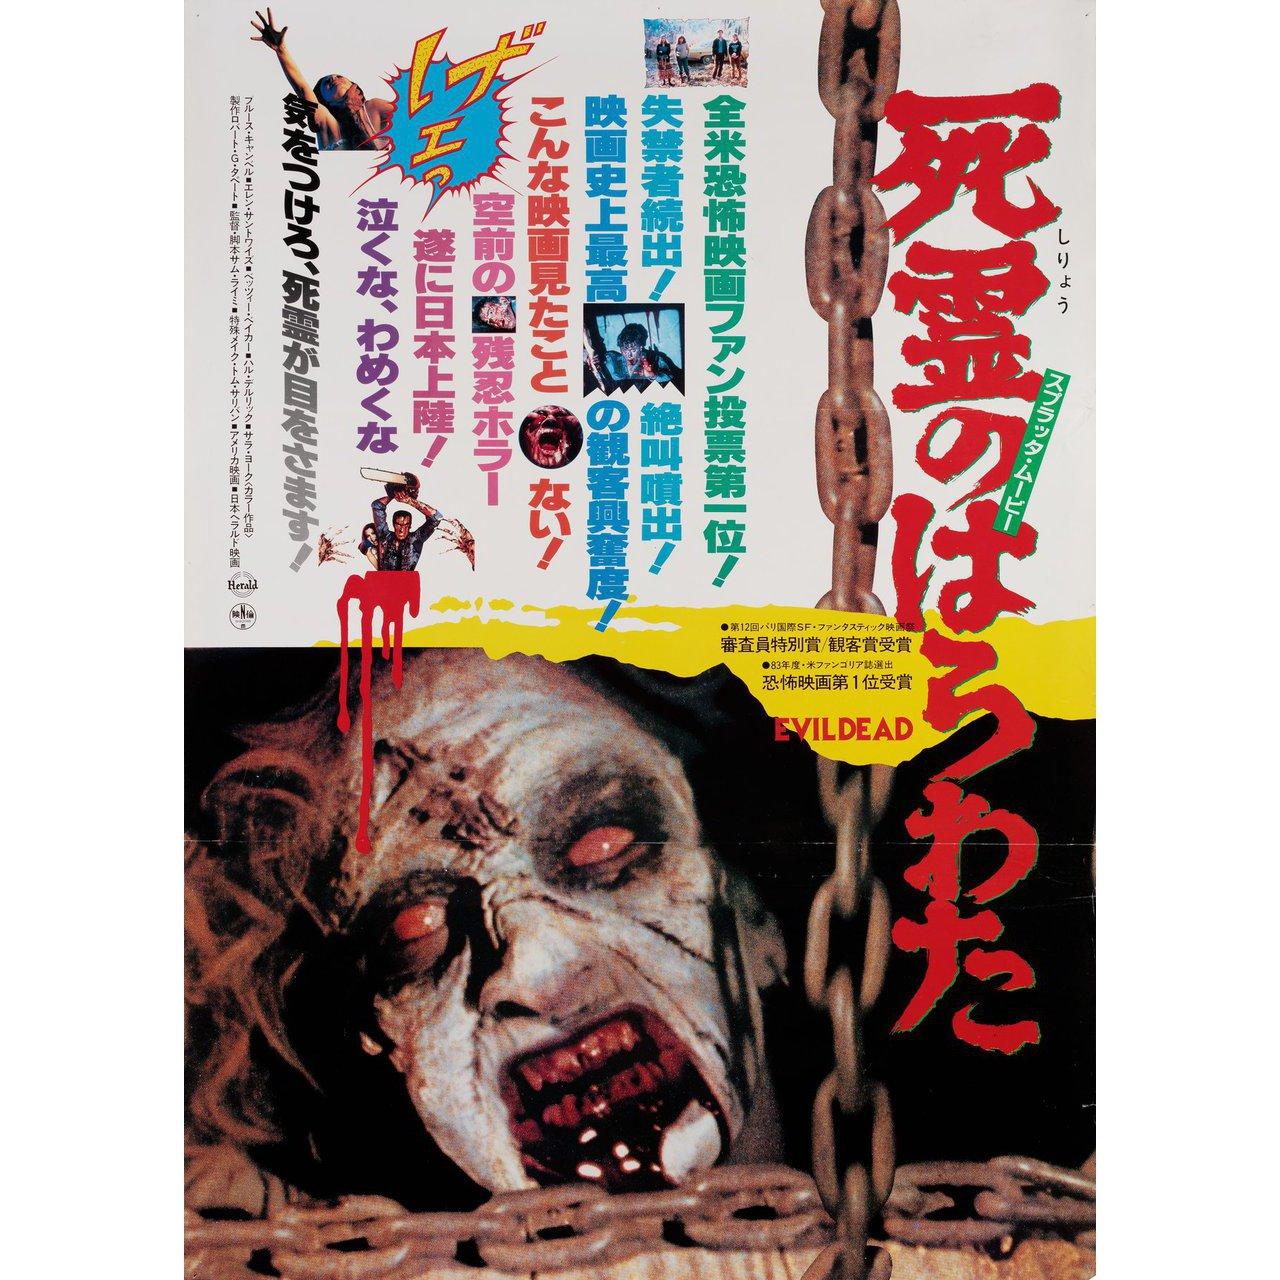 Original 1984 Japanese B2 poster for the 1981 film The Evil Dead directed by Sam Raimi with Bruce Campbell / Ellen Sandweiss / Richard DeManincor / Betsy Baker. Very Good-Fine condition, rolled. Please note: the size is stated in inches and the